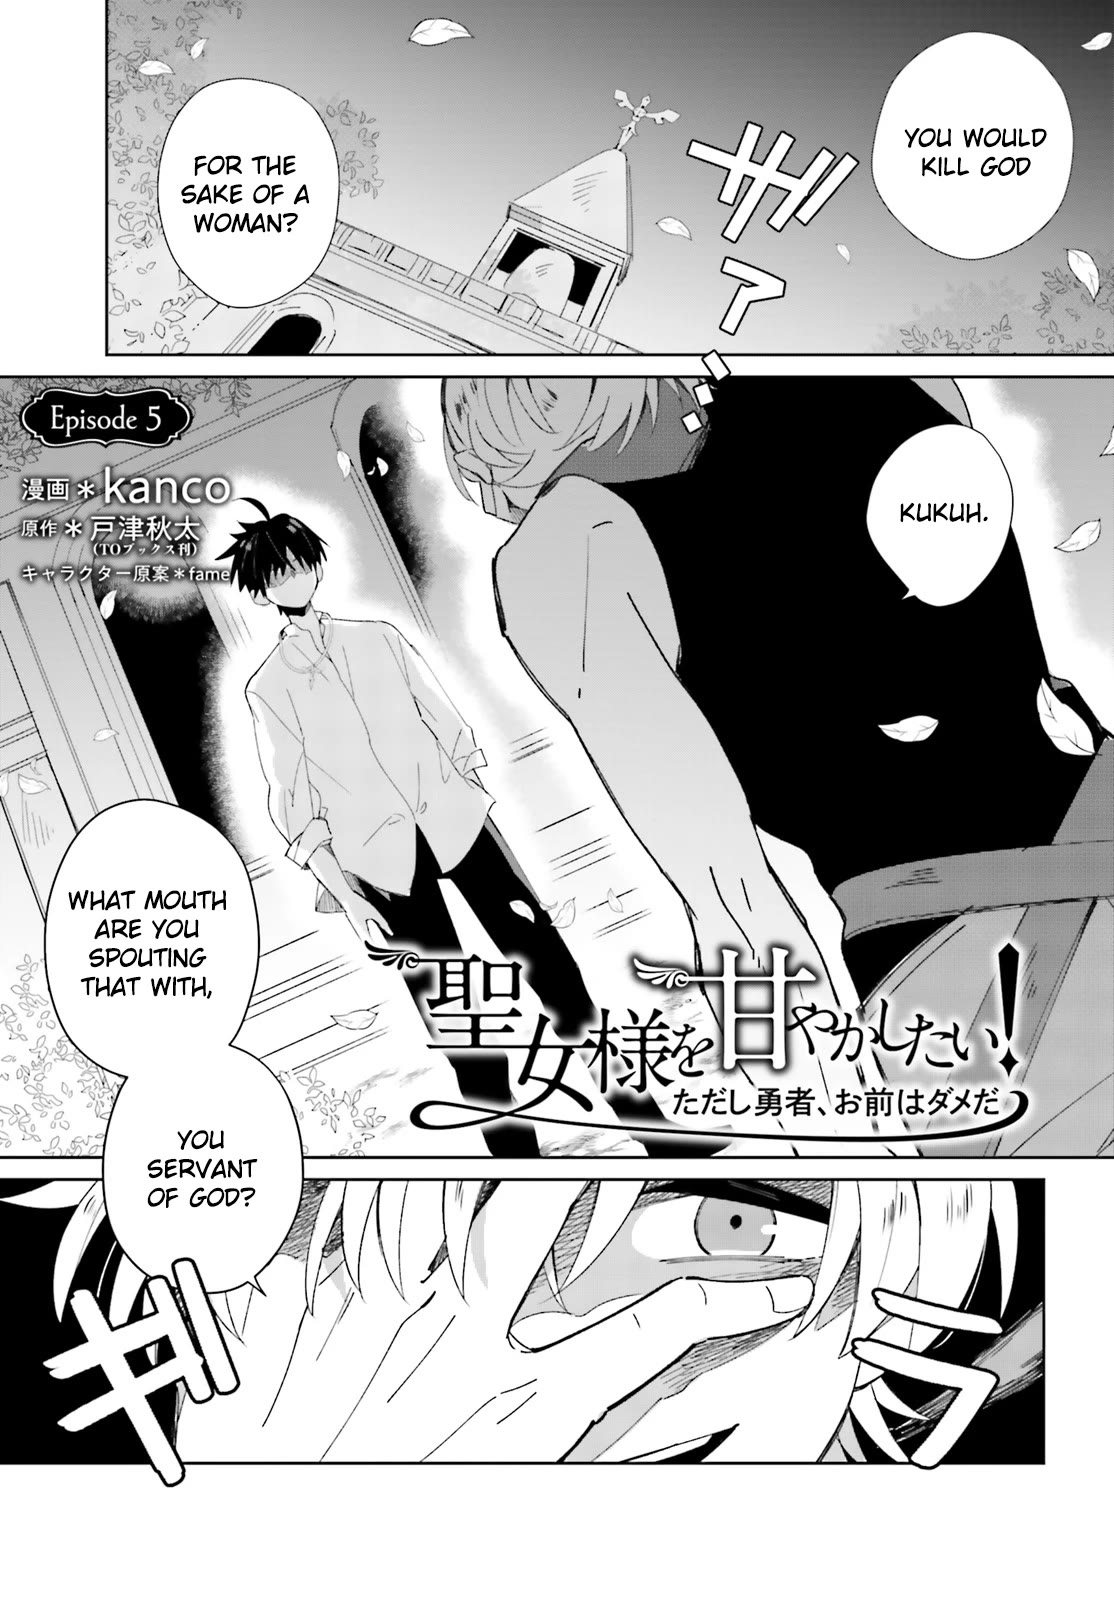 I Want To Pamper The Holy Maiden! But Hero, You’Re No Good. - Page 1